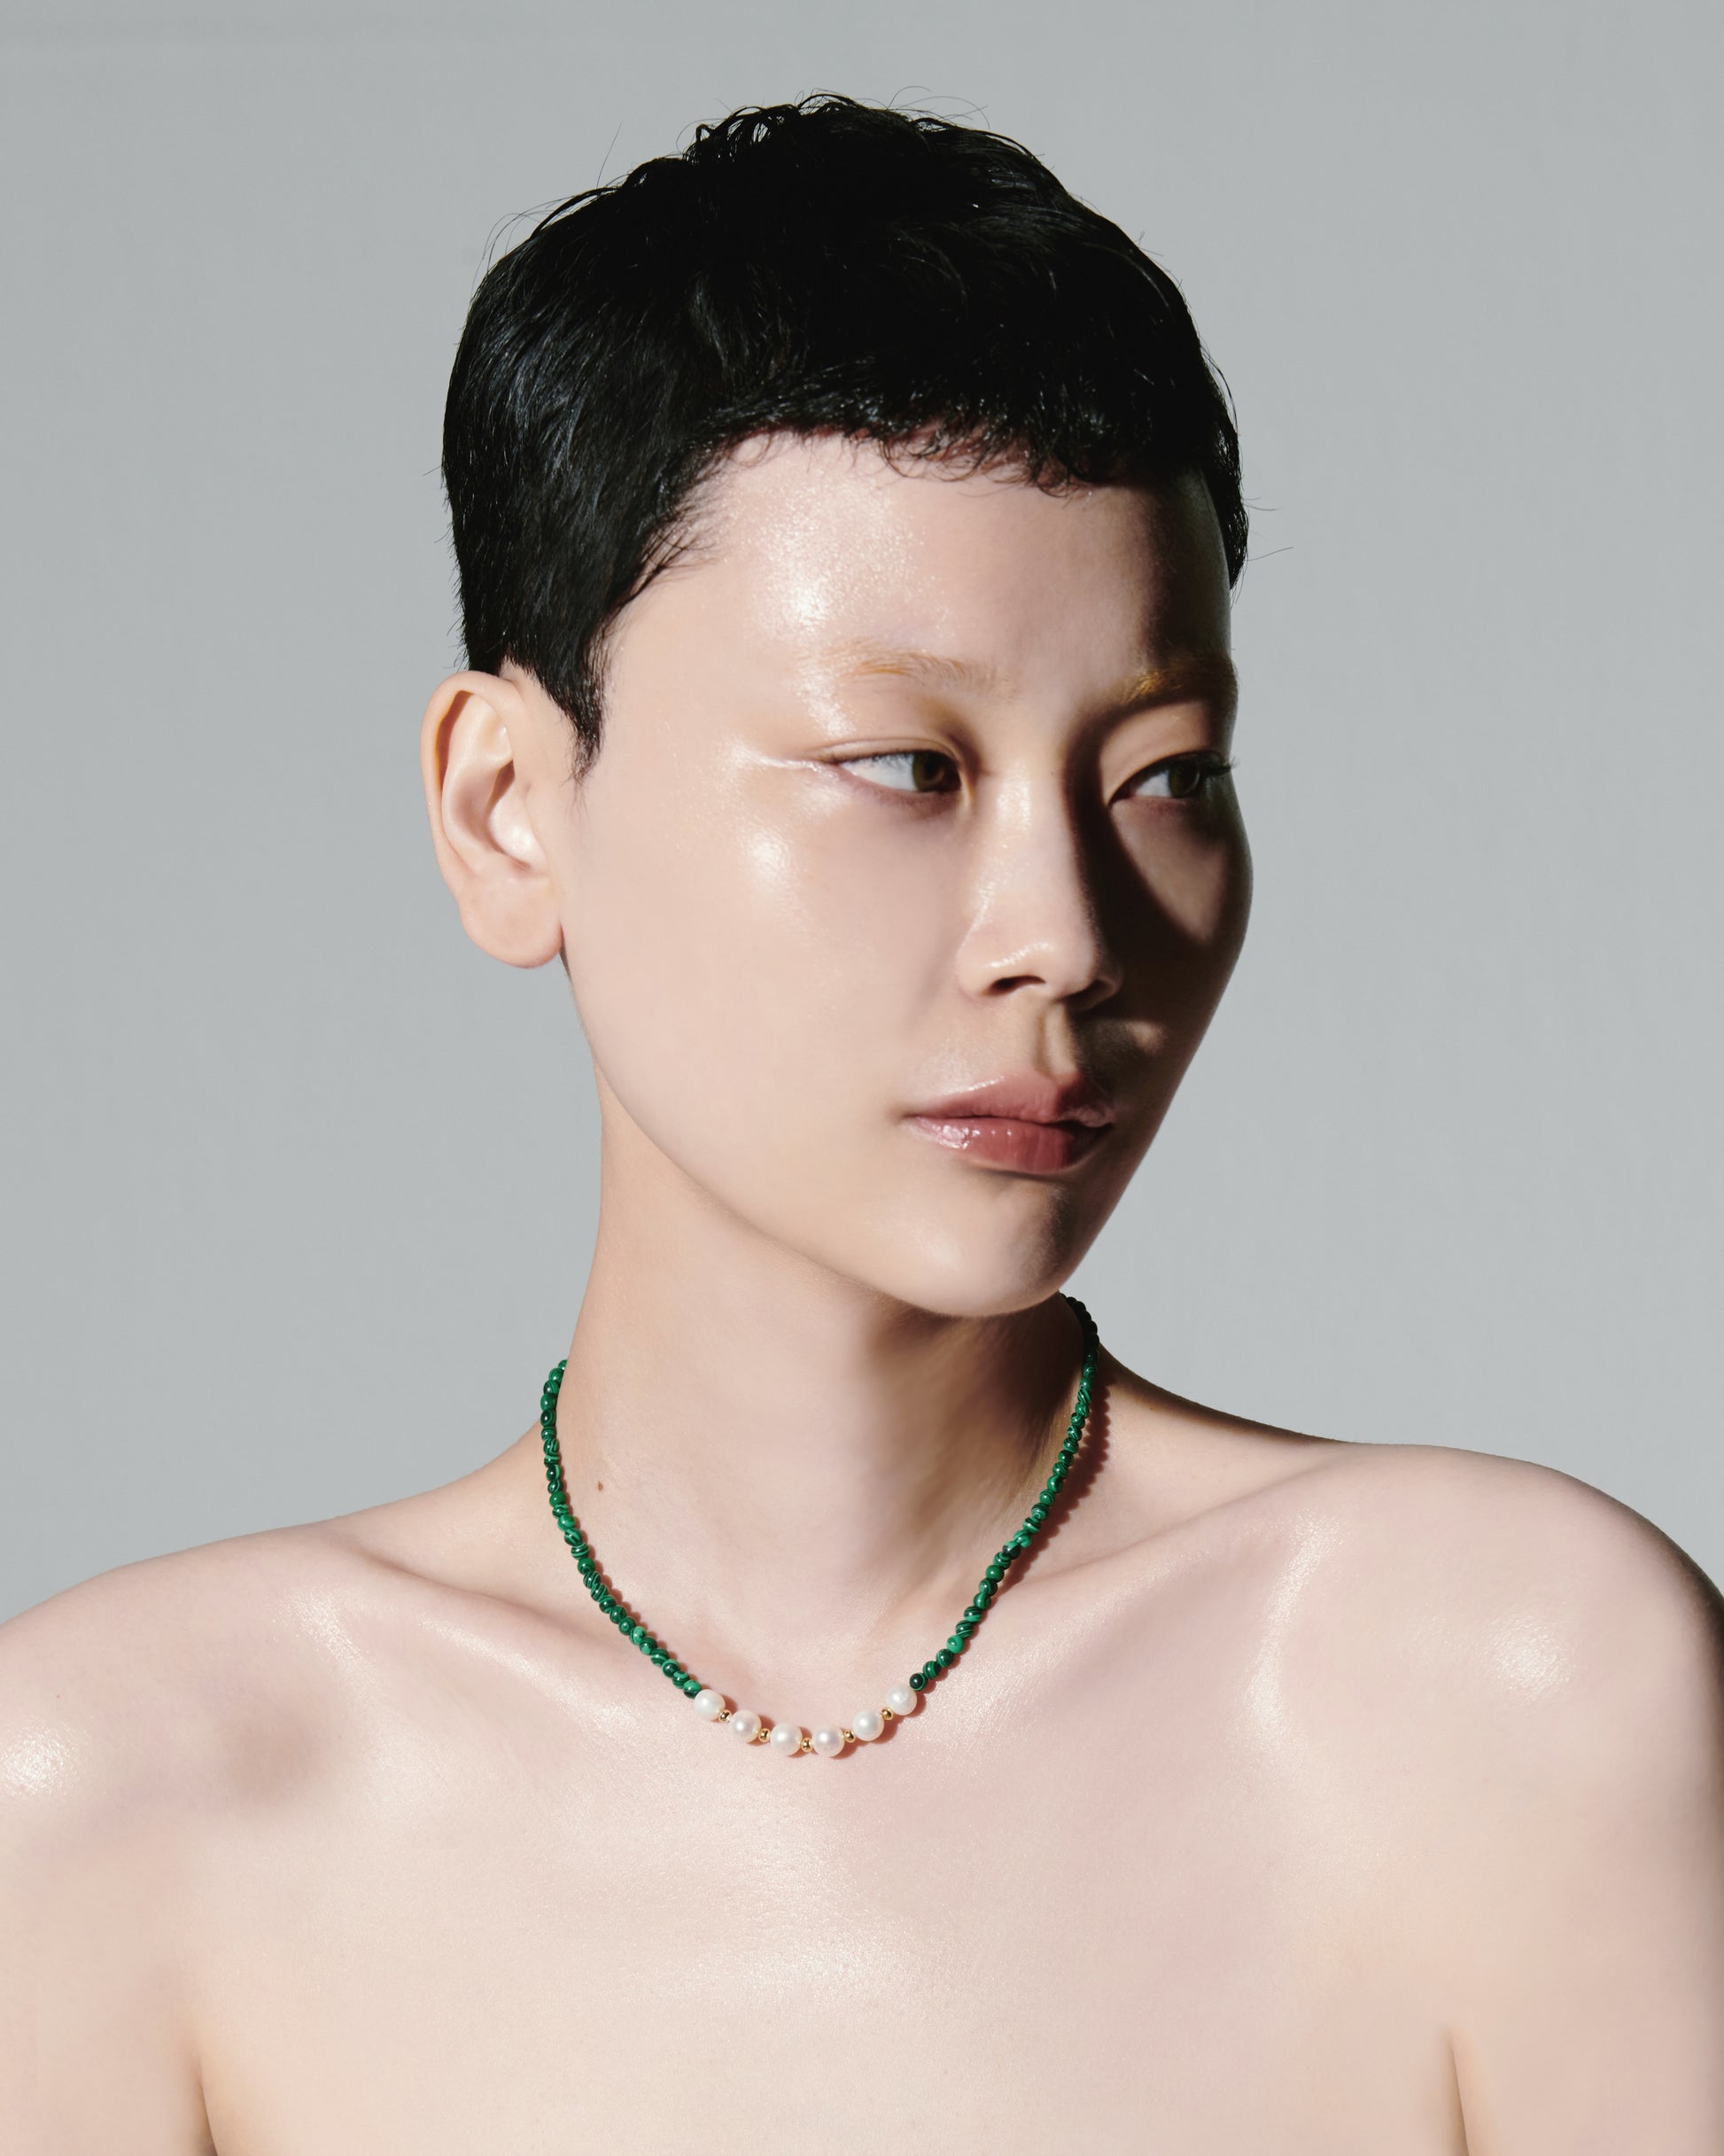 Sonora Green Glass and Freshwater Pearls with Gold Metal Beads Necklace Choker Juxtaposition Studio Seoul Korea